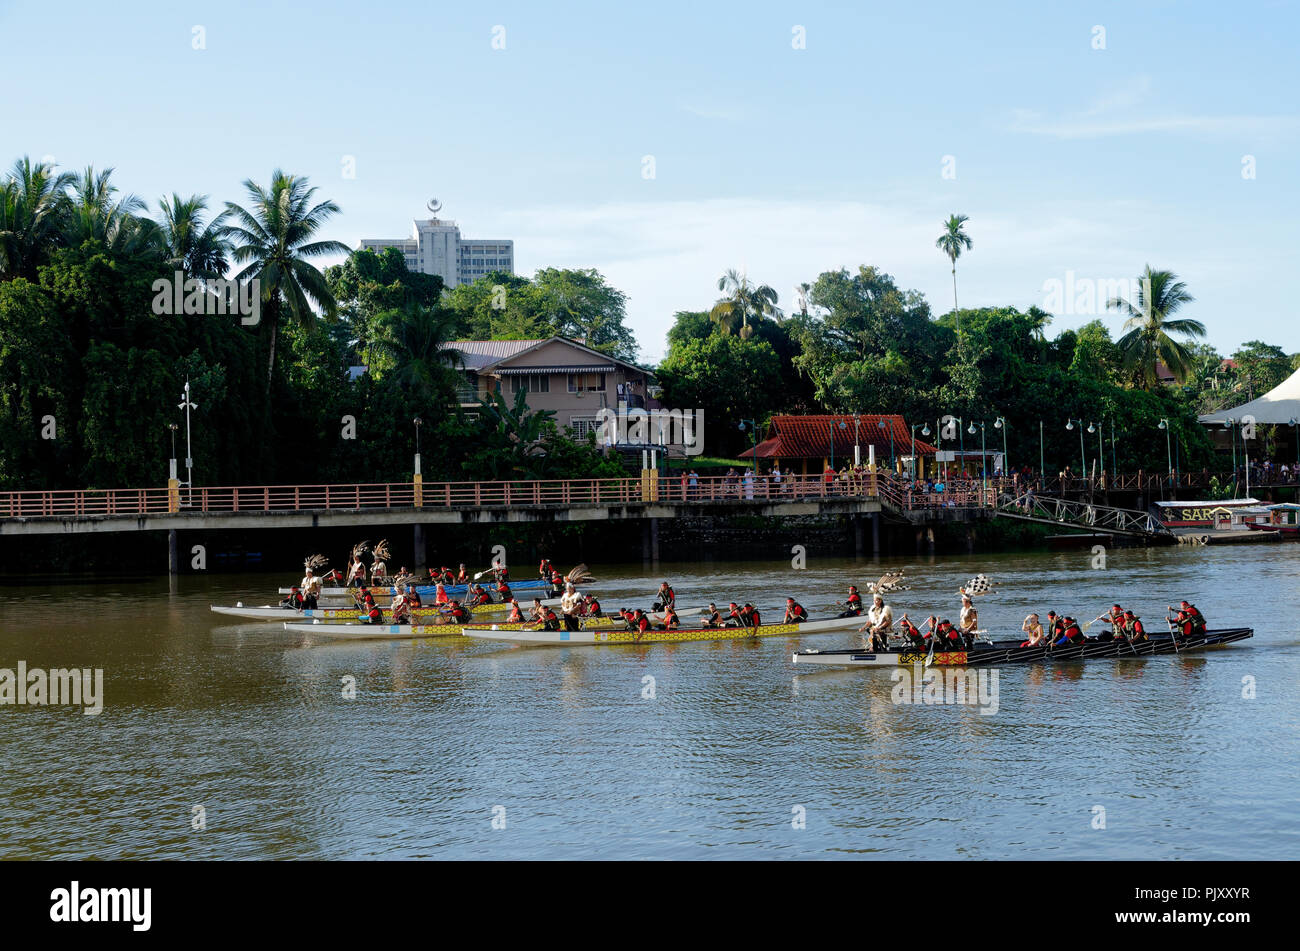 Kuching, Sarawak river, boats with natives in traditional dress form part of the Gawai day parade and celebration Stock Photo